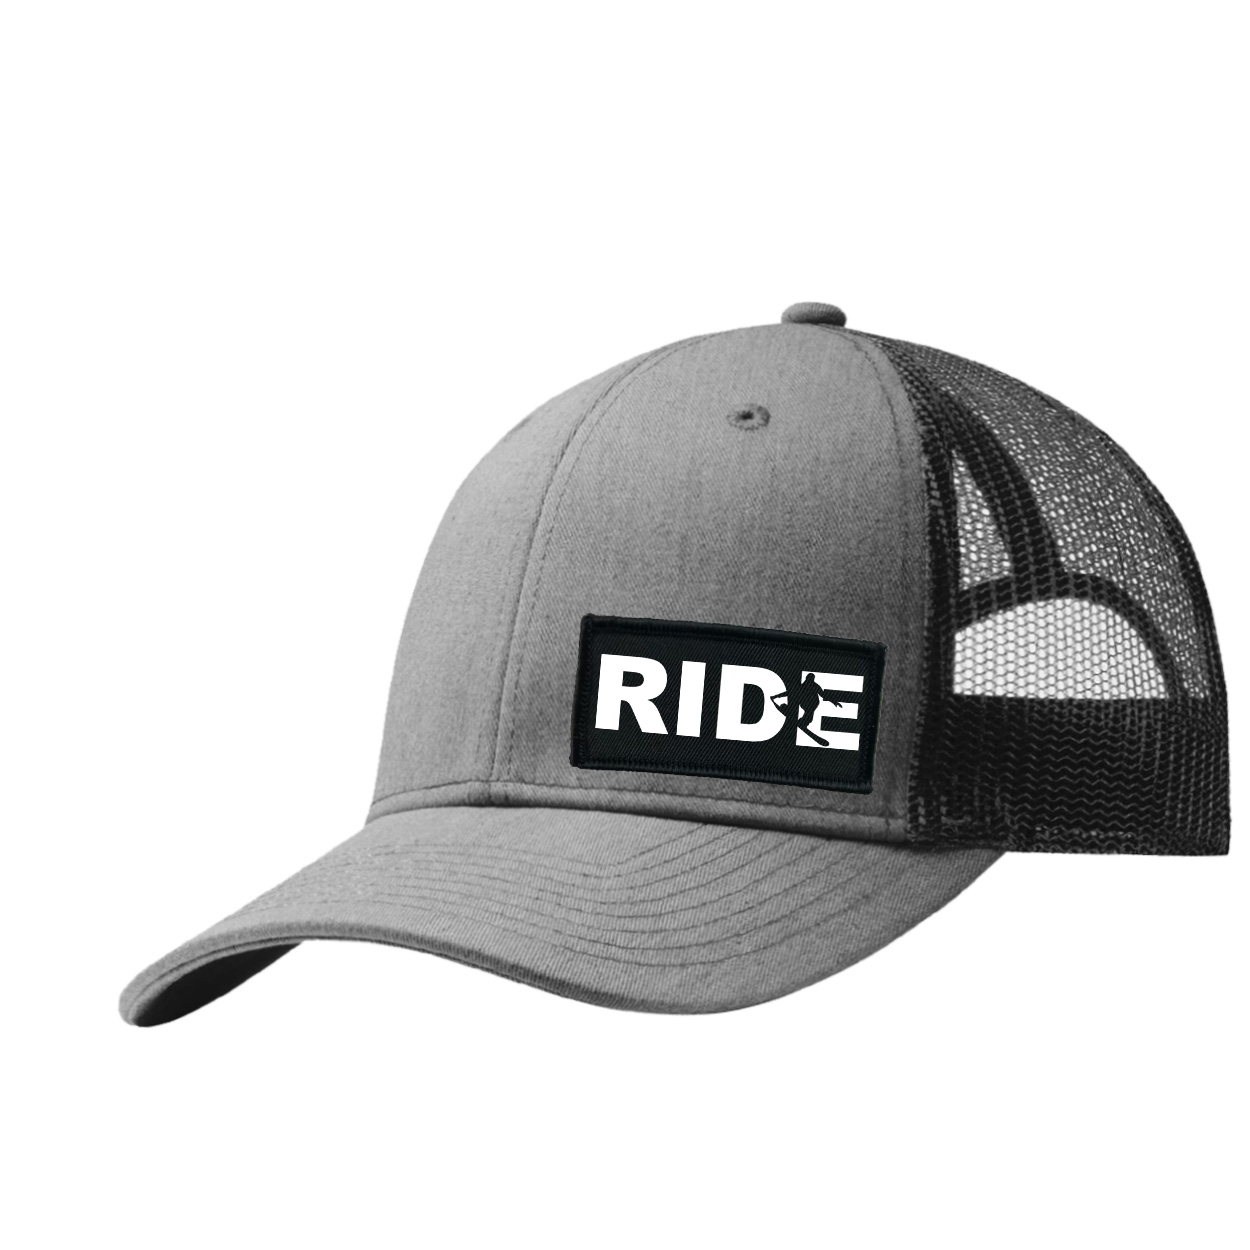 Ride Snowboard Logo Night Out Woven Patch Snapback Trucker Hat Heather Gray/Black (White Logo)